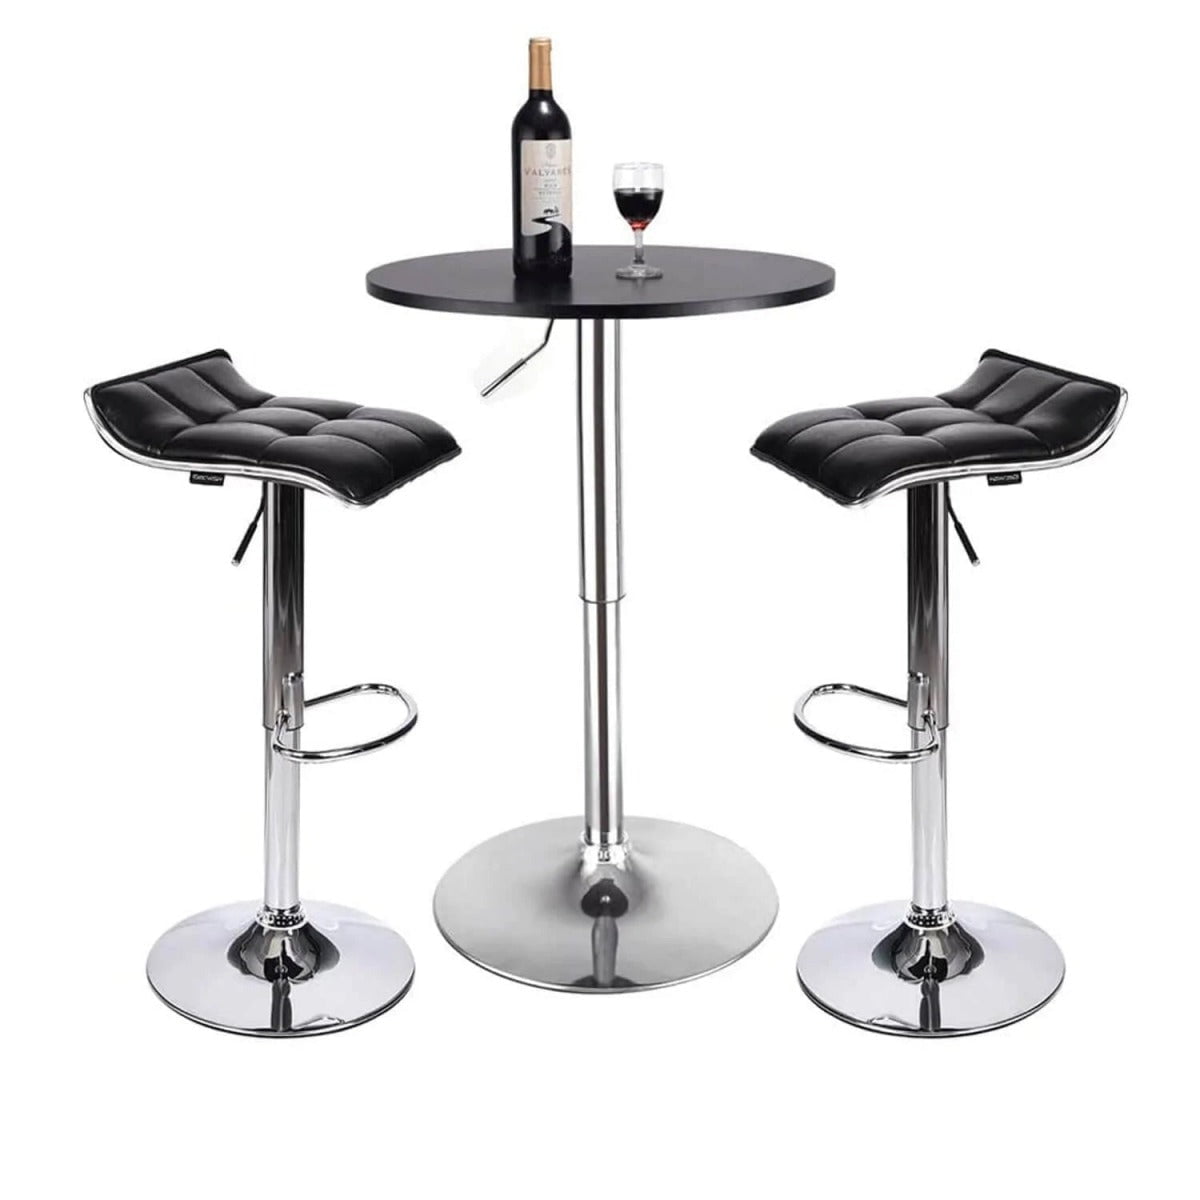 Elecwish Black Bar Table with two Grid Black Bar Stools Set 3-Piece OW0306